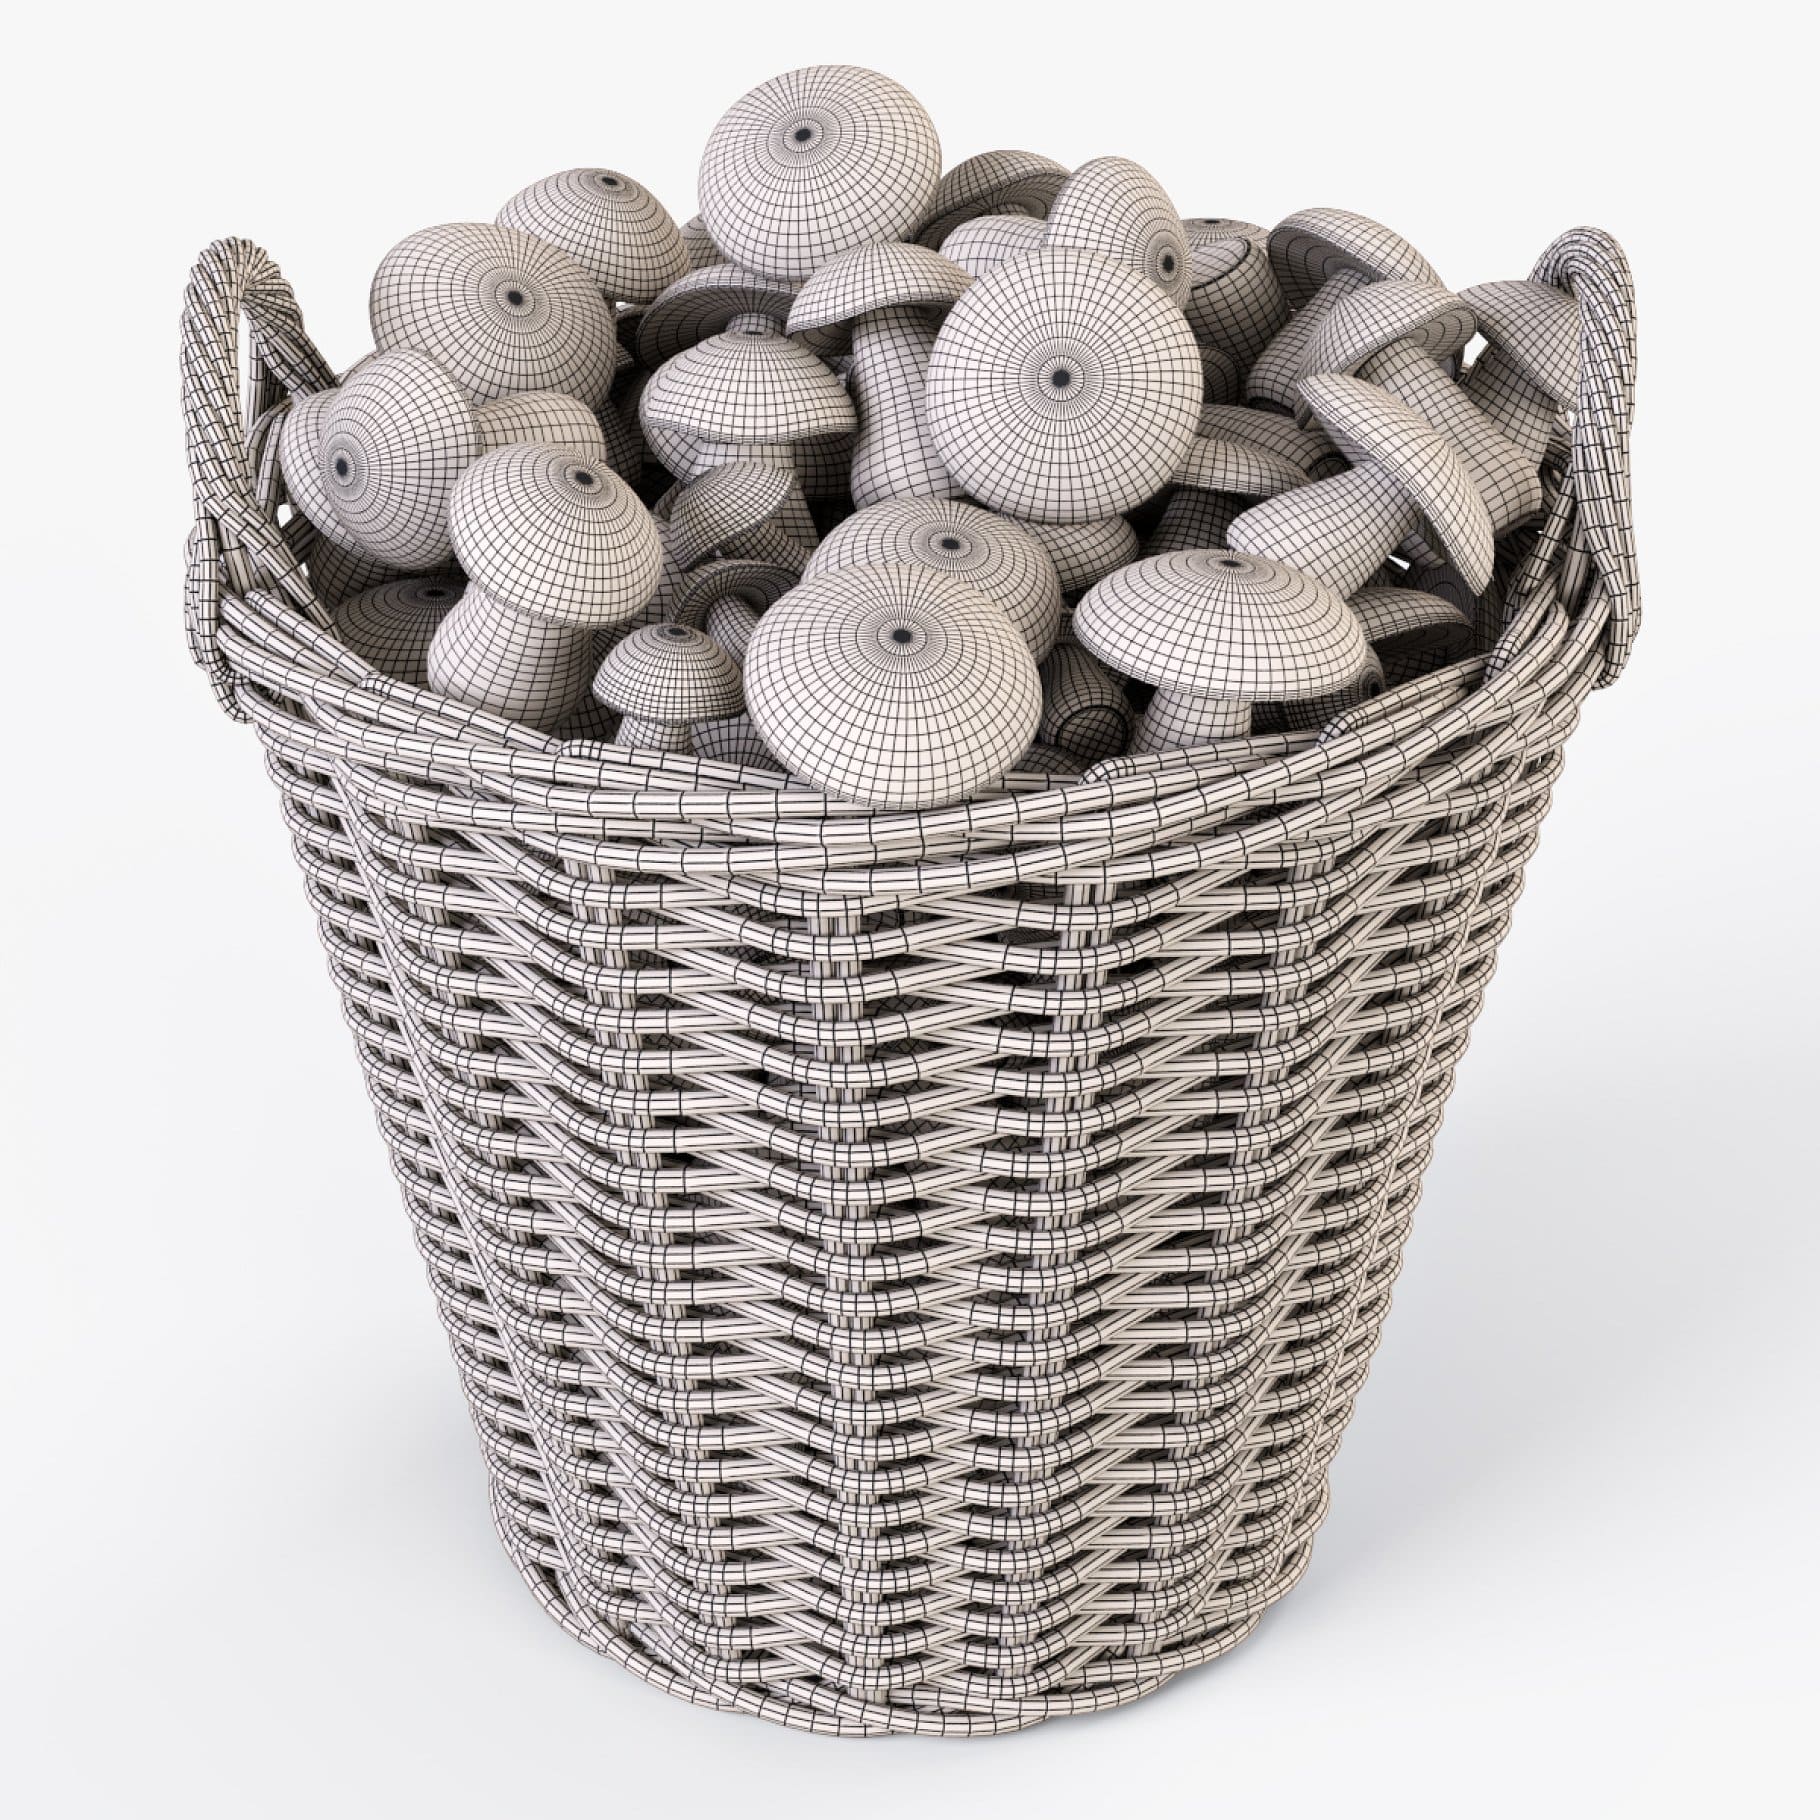 3D model of mushrooms and baskets.